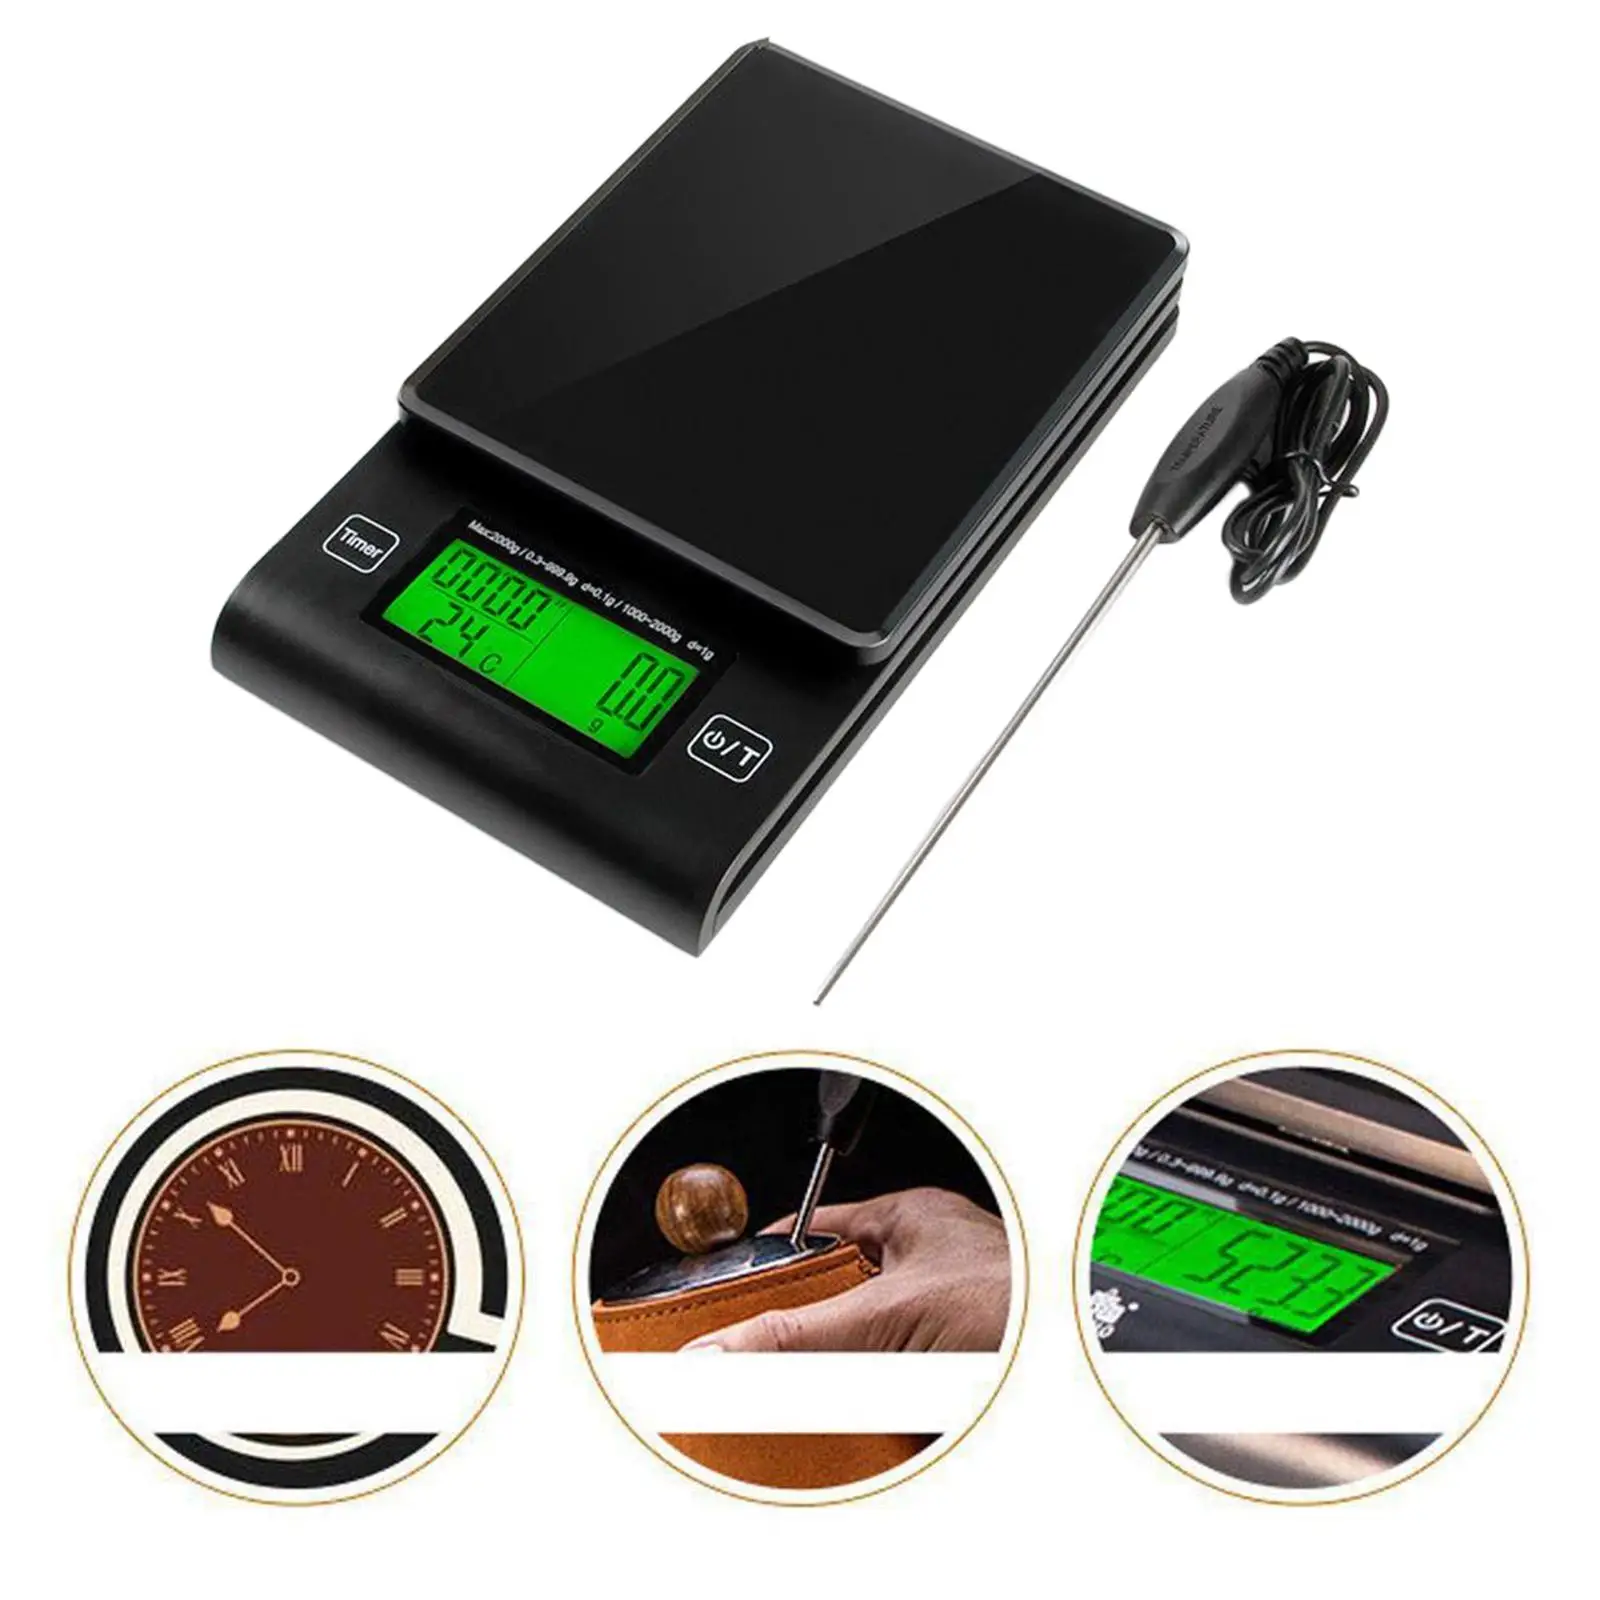 Digital Kitchen Scale Baking Cooking Pour Over Drip Coffee Scale Food Scale Electronic Espresso Scale for Cafe Restaurant Home